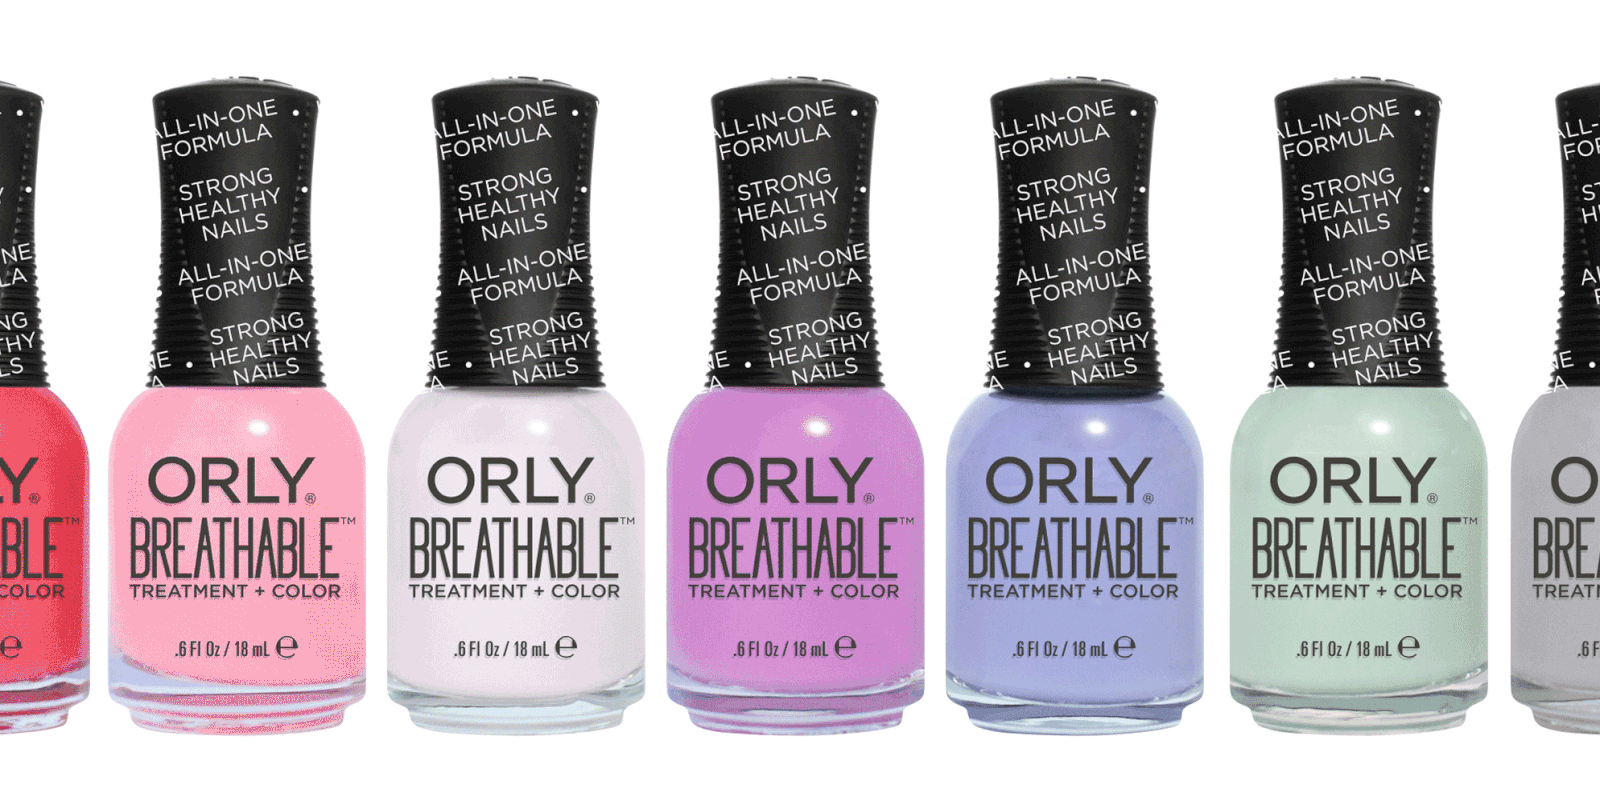 ORLY Breathable Treatment + Color Nail Polish - wide 3